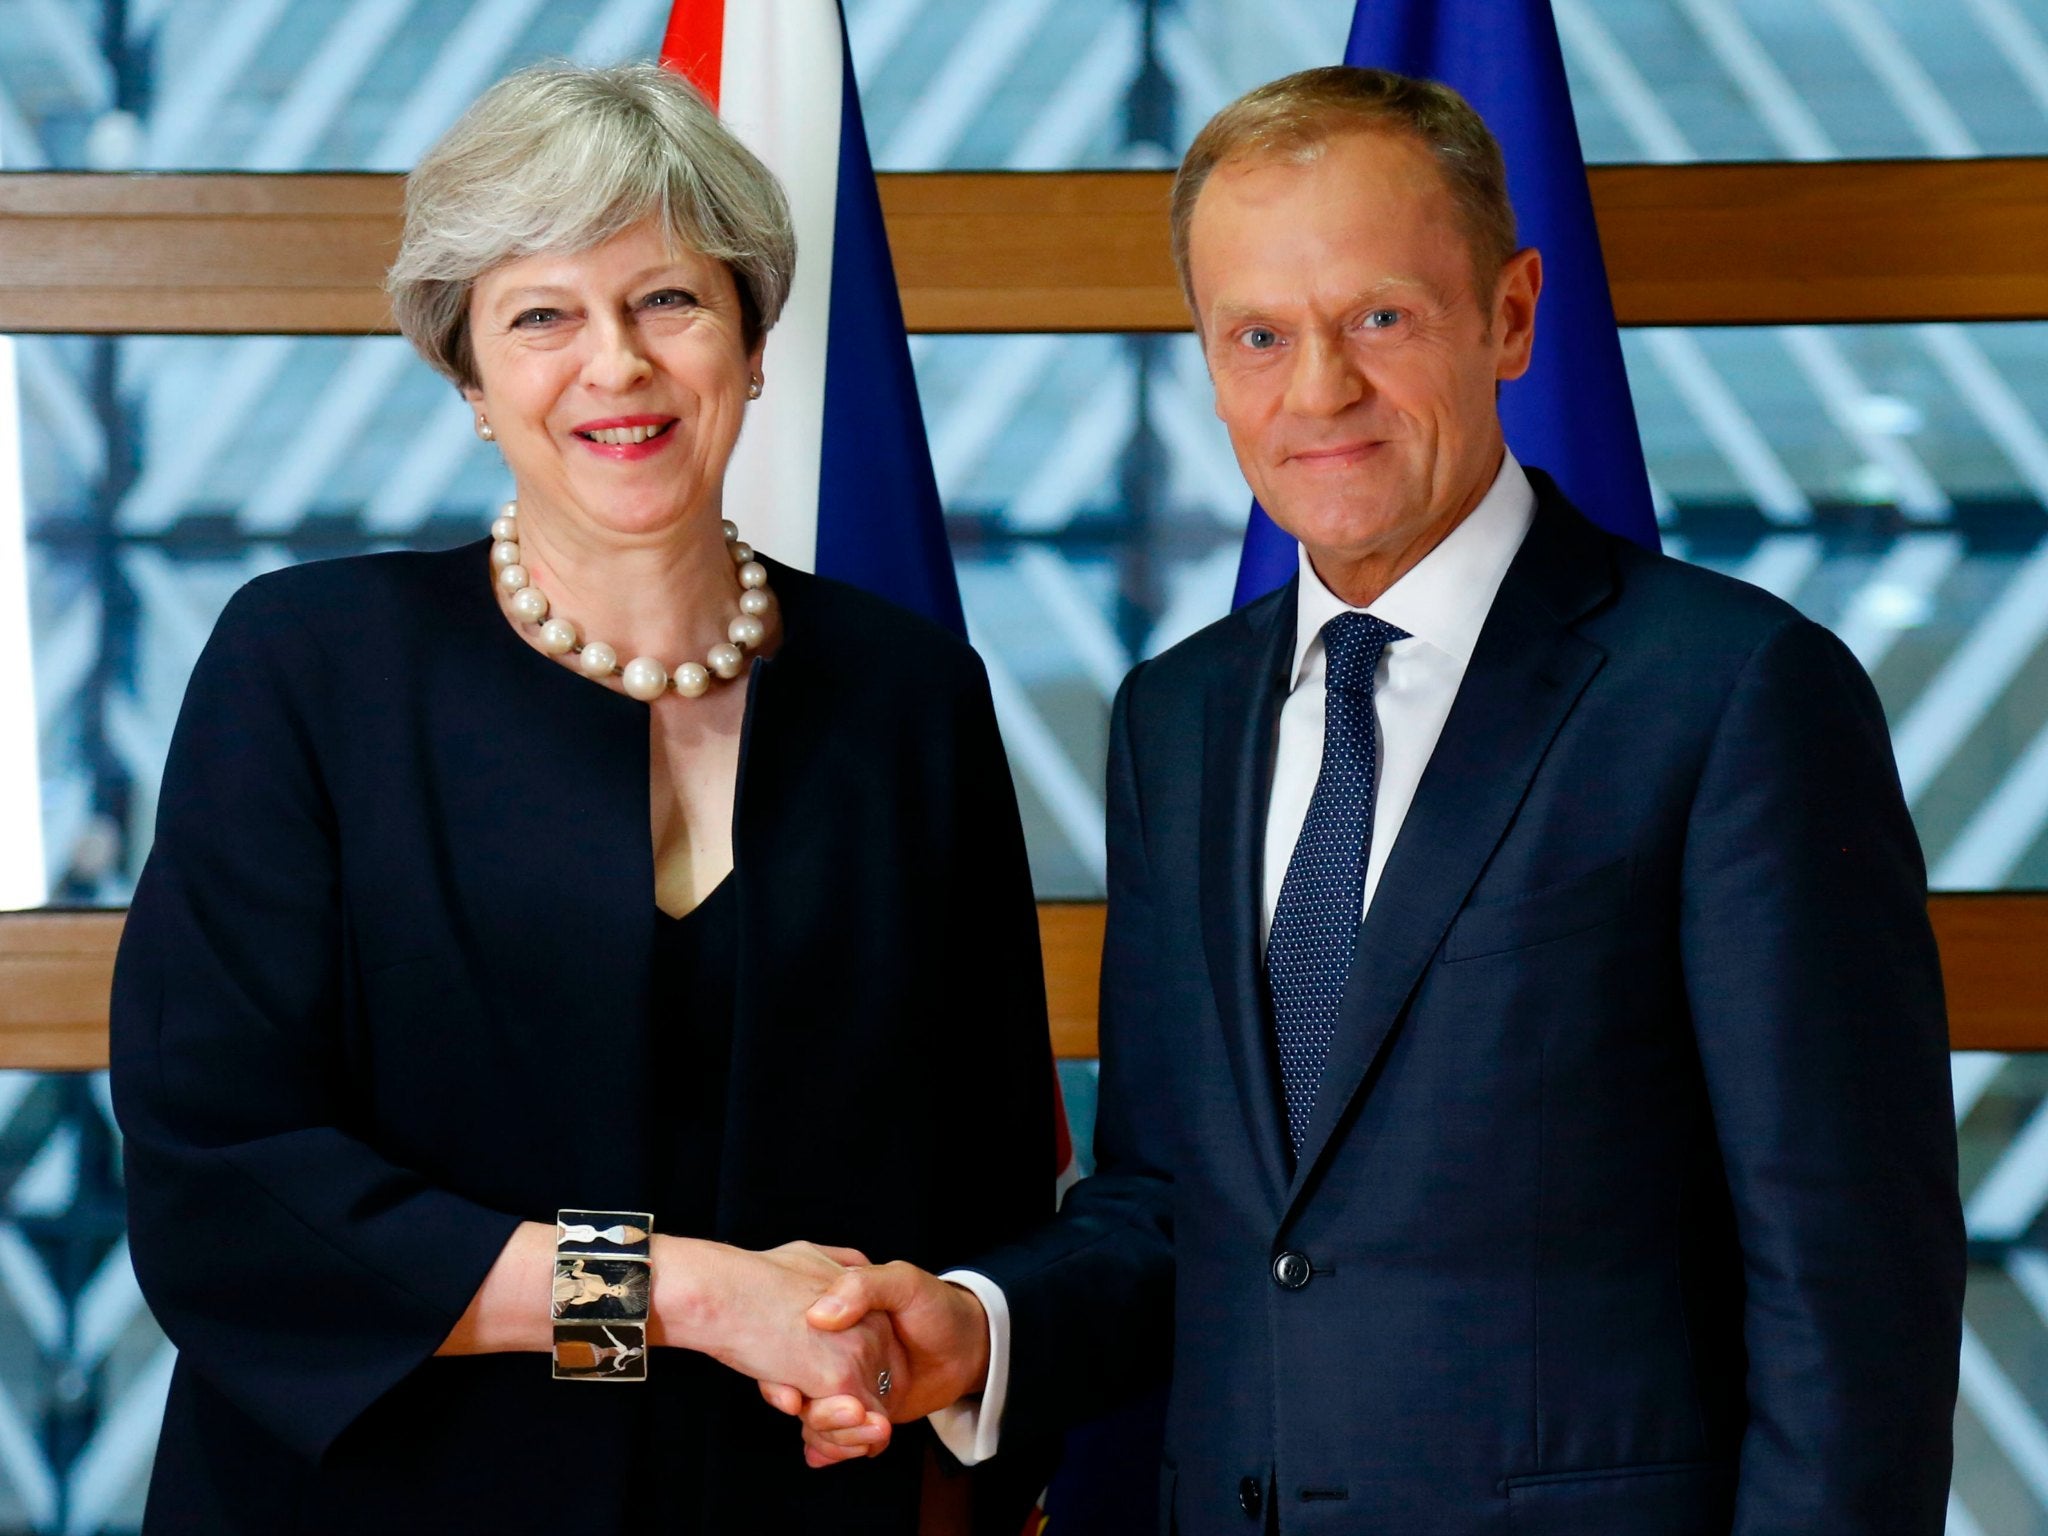 British Prime Minister Theresa May and European Council President Donald Tusk during an EU leaders summit in Brussels